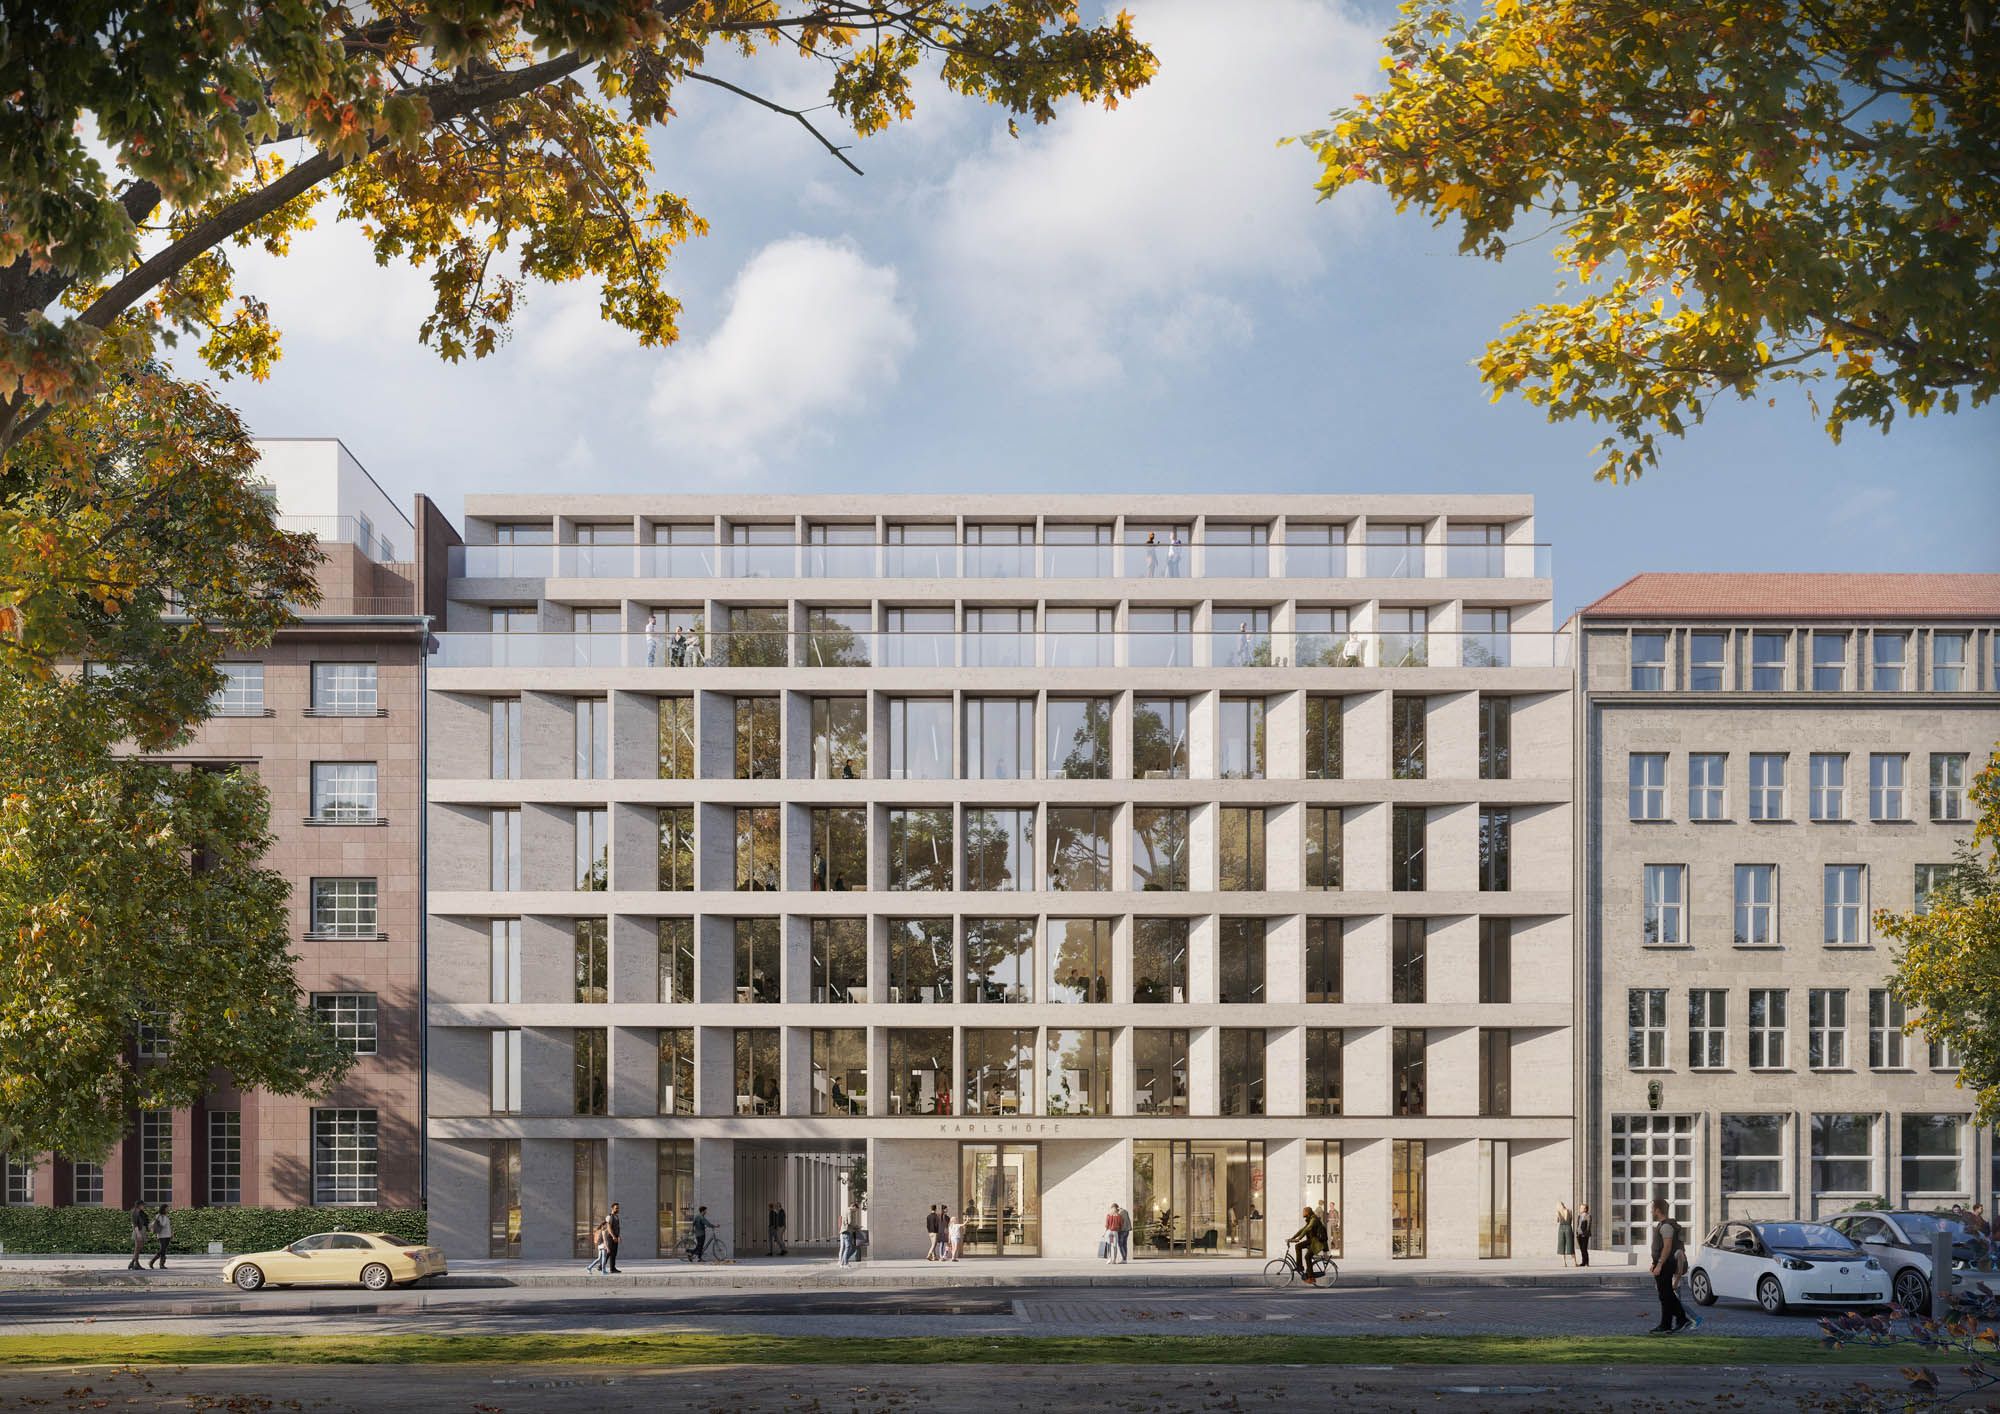 Frontview of the new building at Am Karlsbad